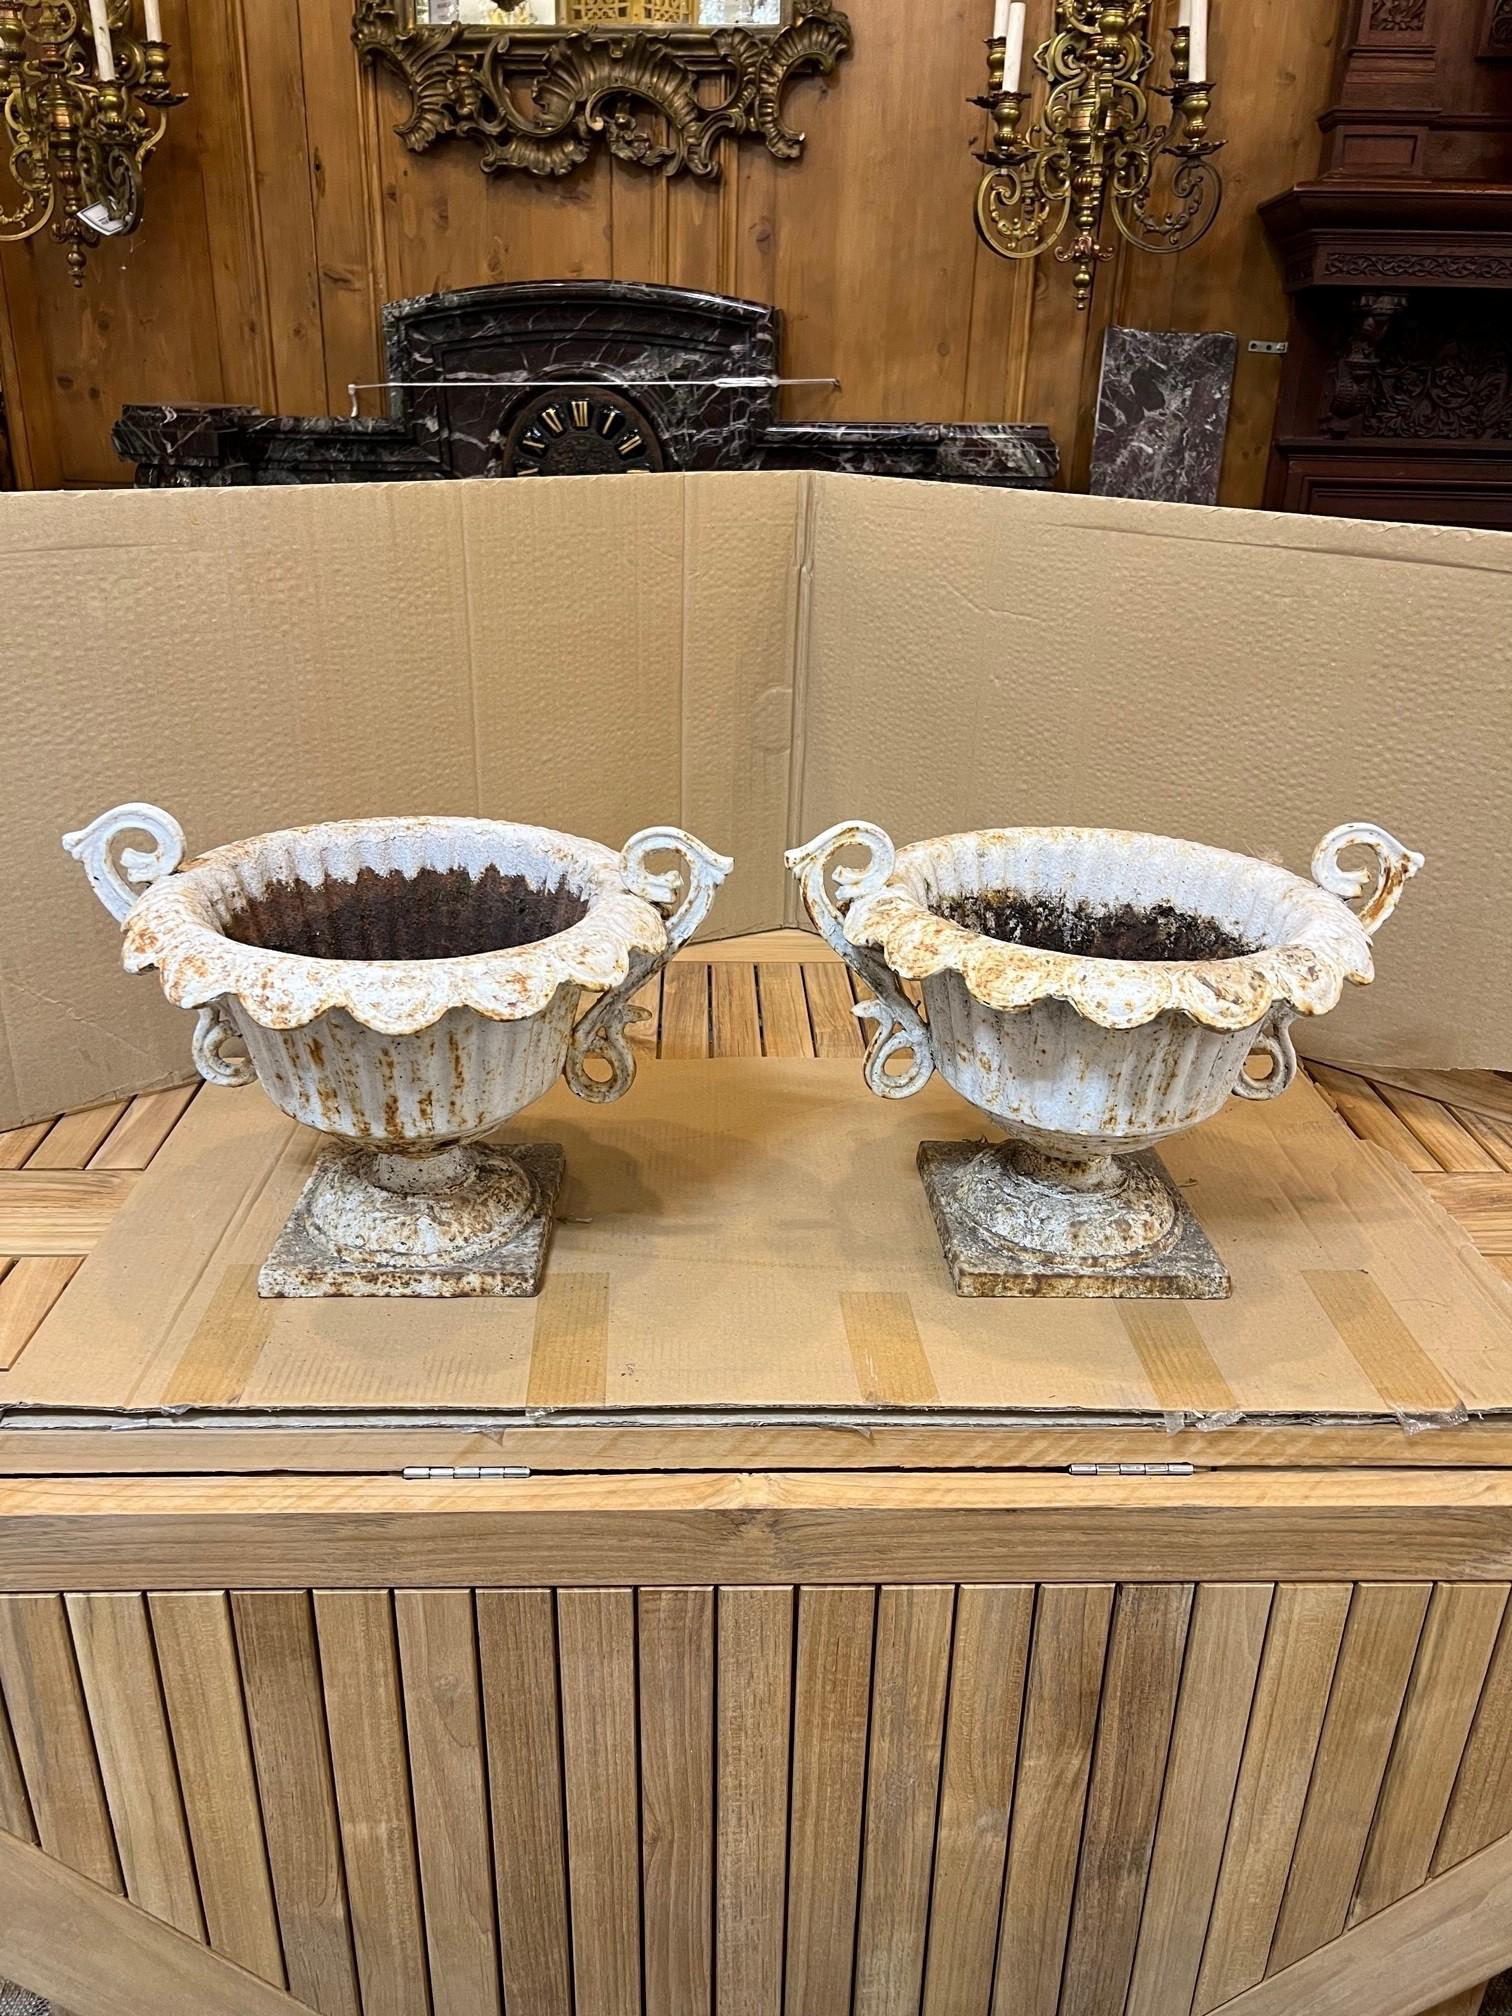 A great pair of Mid-20th century cast iron handle urns fluted with a square base. This small pair of urns came from an estate in Greenwich Ct. and are in good condition. A nice small pair of urns that would look amazing on a large table or garden